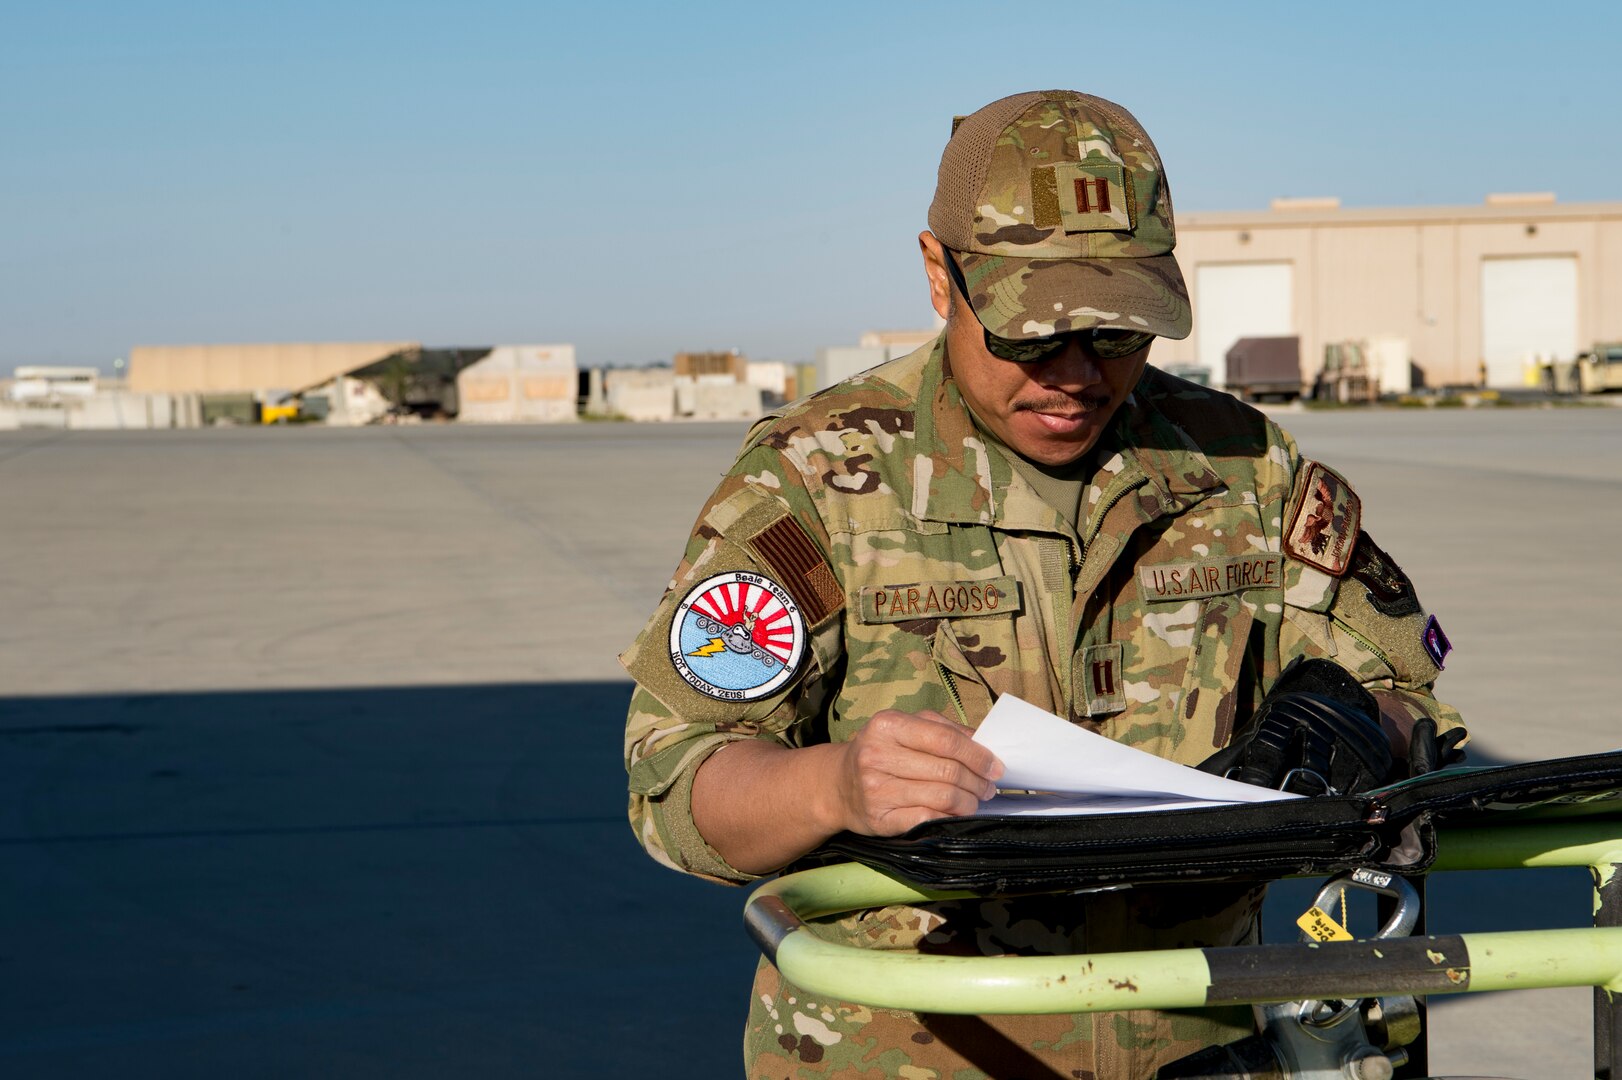 U.S. Air Force pilot assigned to the 28th Expeditionary Air Refueling Squadron reviews documents before conducting a preflight inspection on a KC-135 Stratotanker at Al Udeid Air Base, Qatar, Jan. 14, 2020.